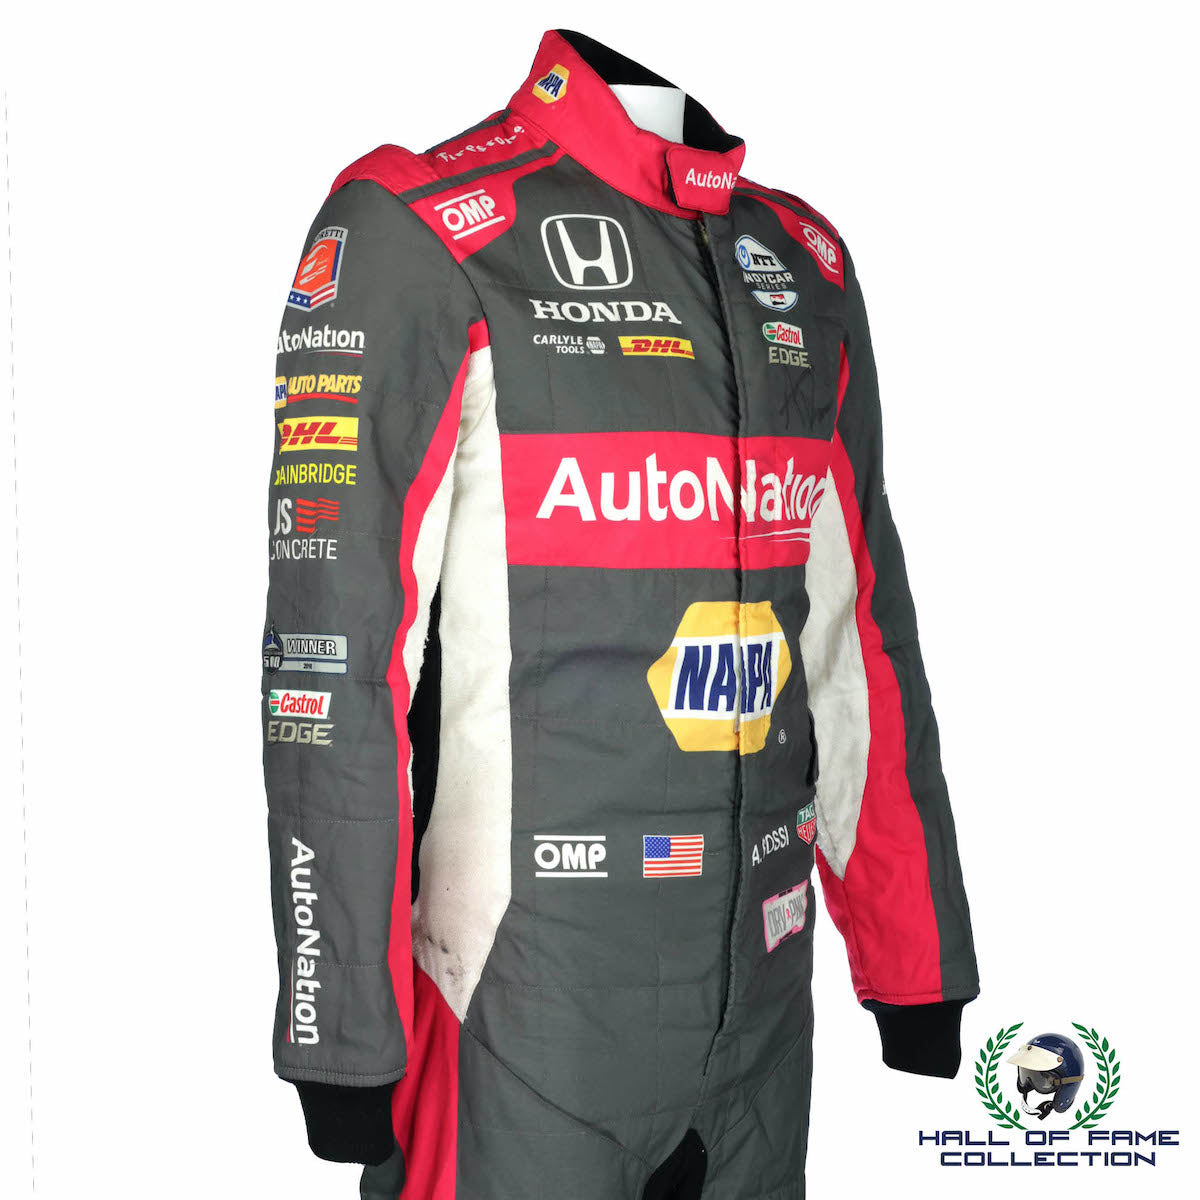 2020 Alexander Rossi Signed St. Pete Race Used Andretti Autosport IndyCar Suit